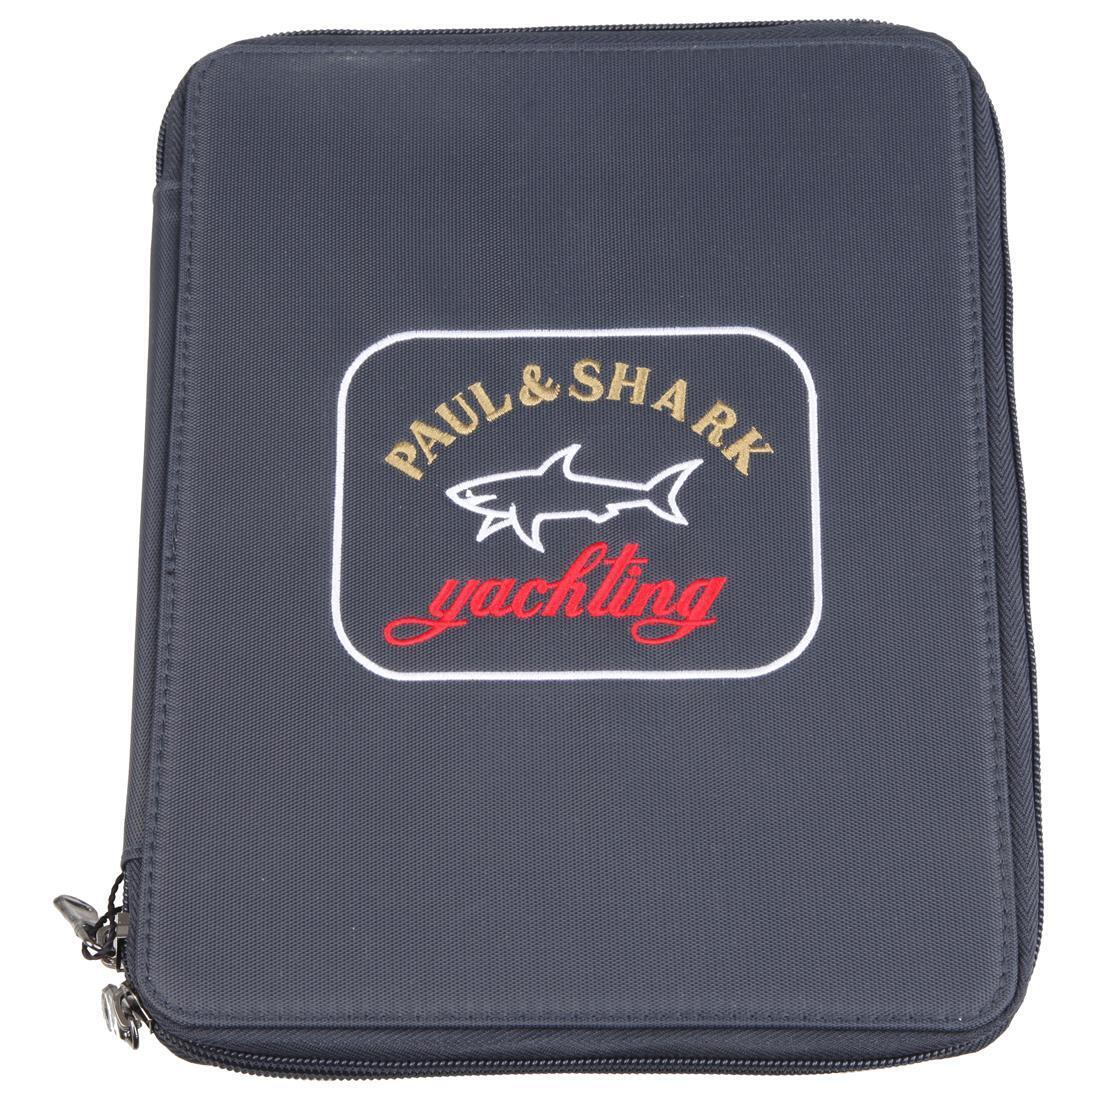 Paul & Shark Yachting iPad 2 3 4 generation protection case cover bag blue